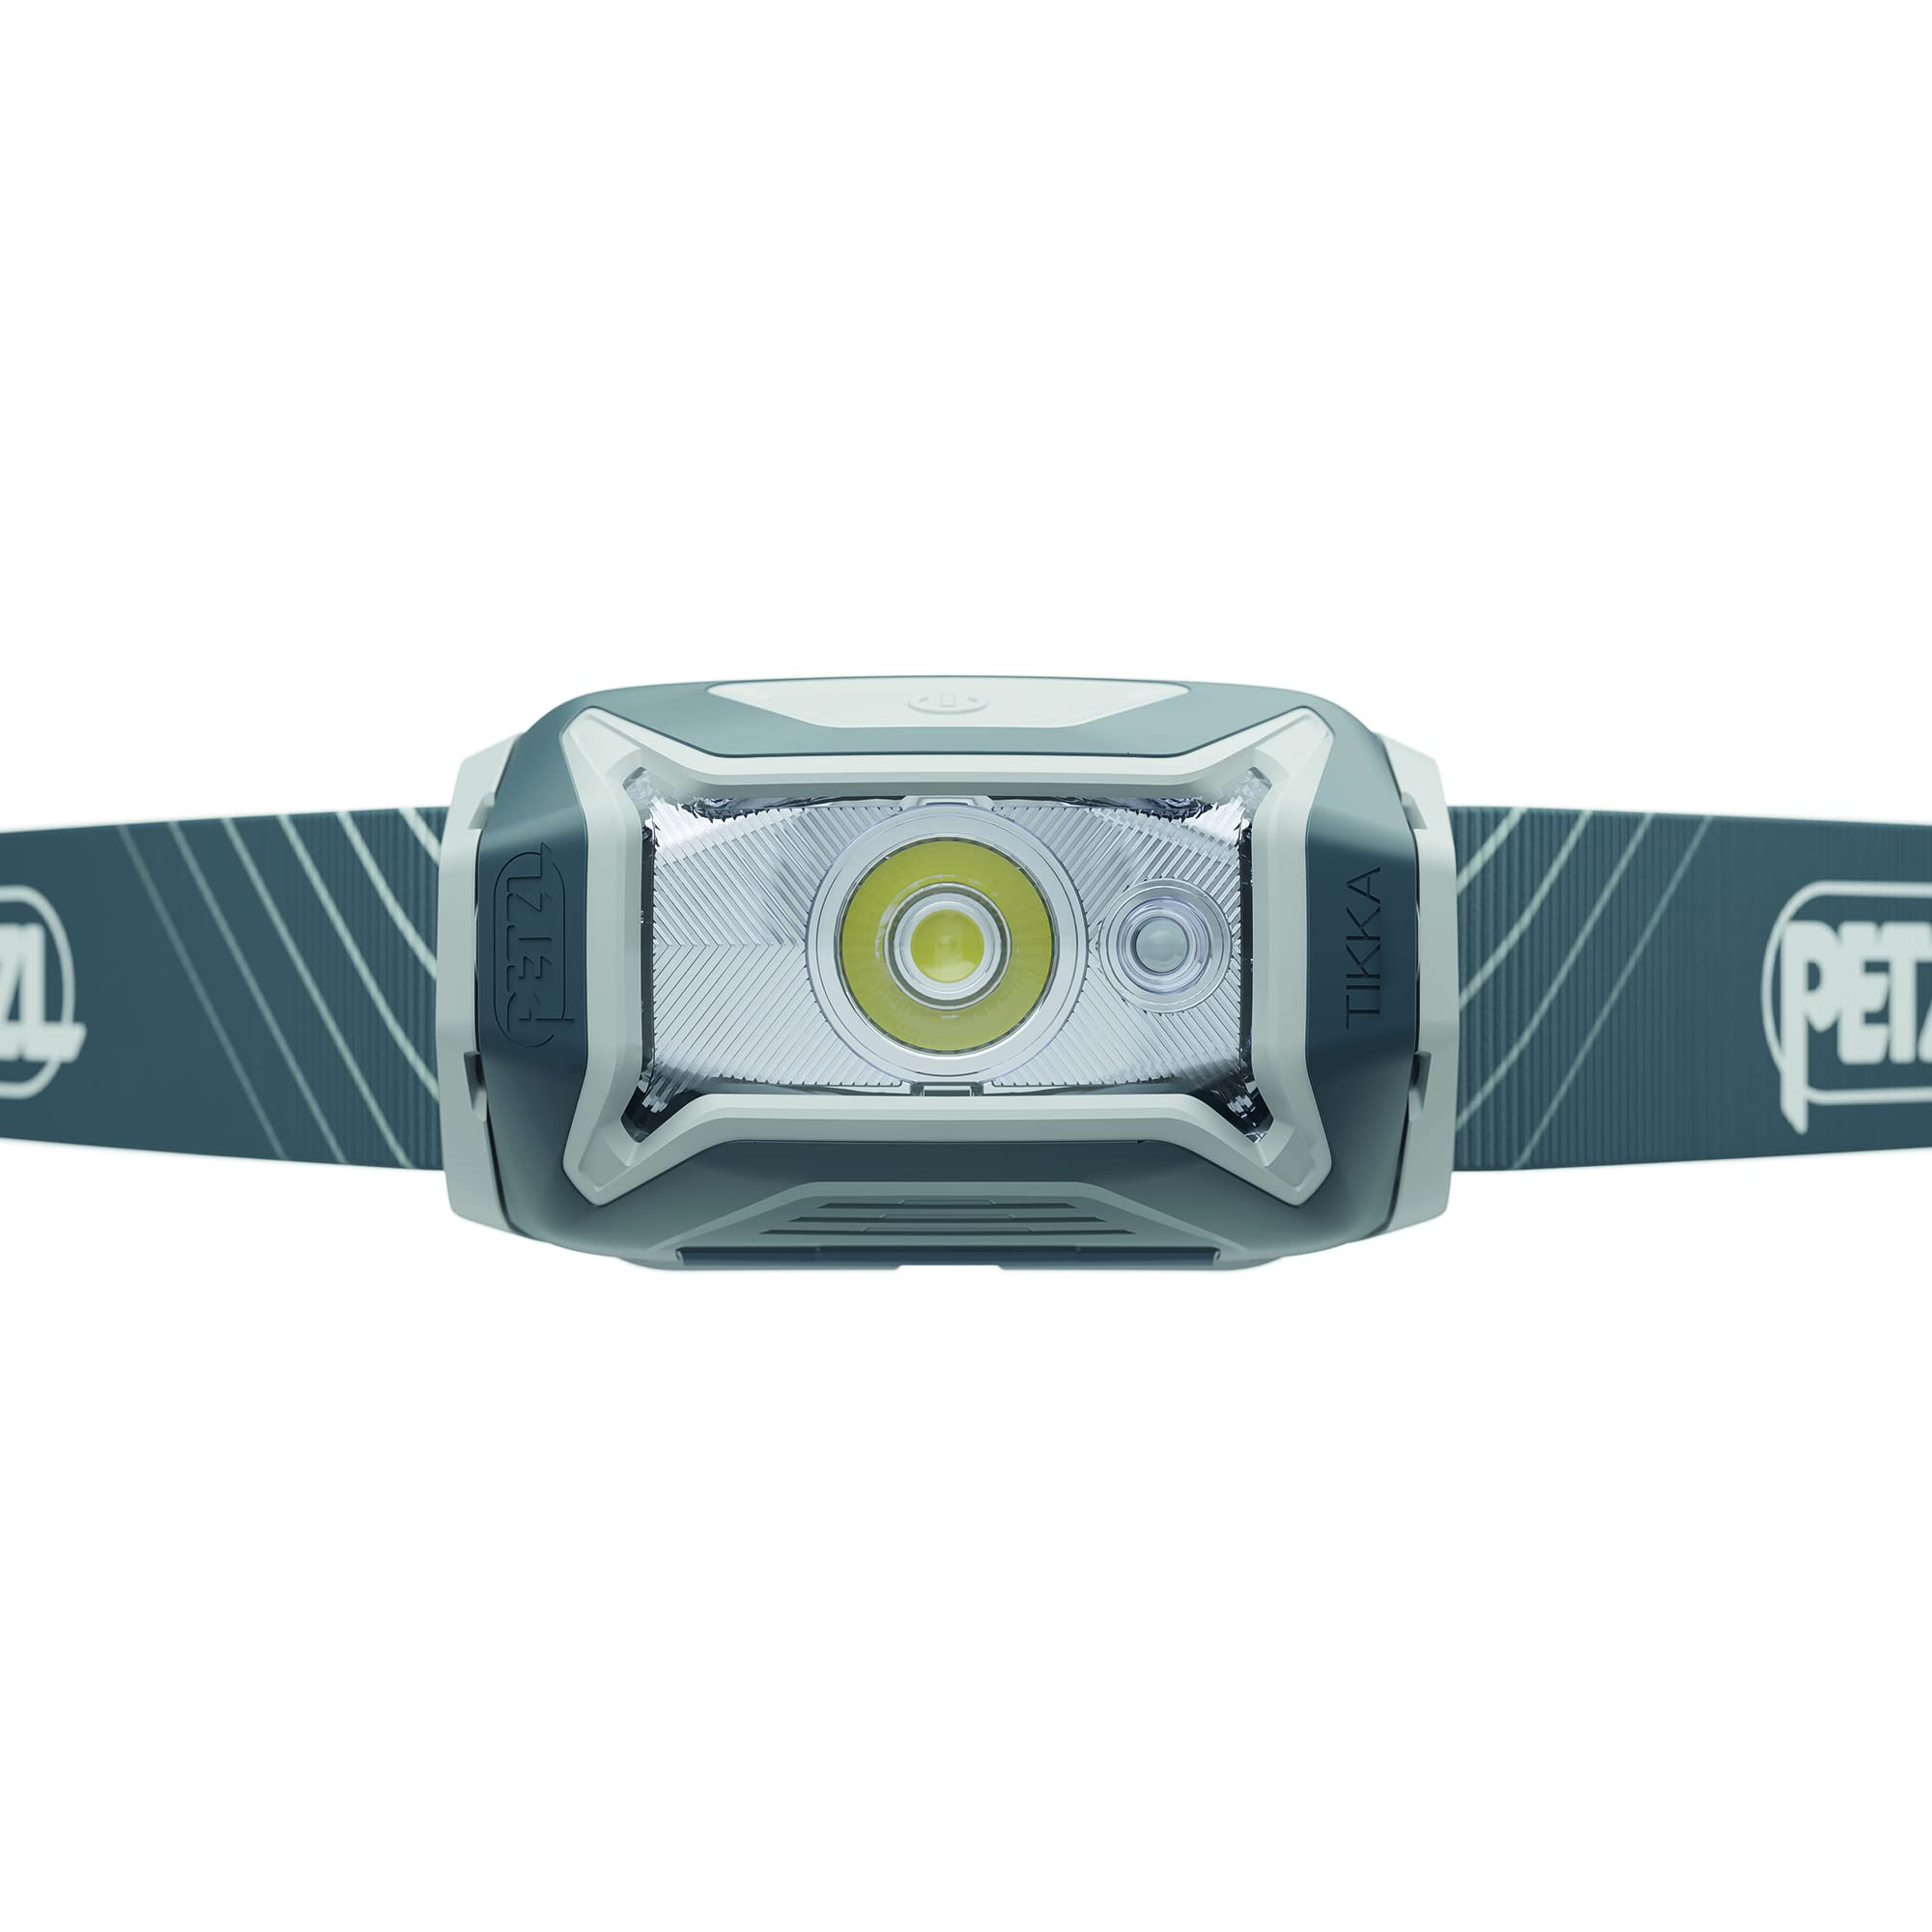 Petzl Tikka CORE Headlamp - Rechargeable, Compact 450 Lumen Light with Red  Lighting, for Hiking, Climbing, and Camping - Grey Gray